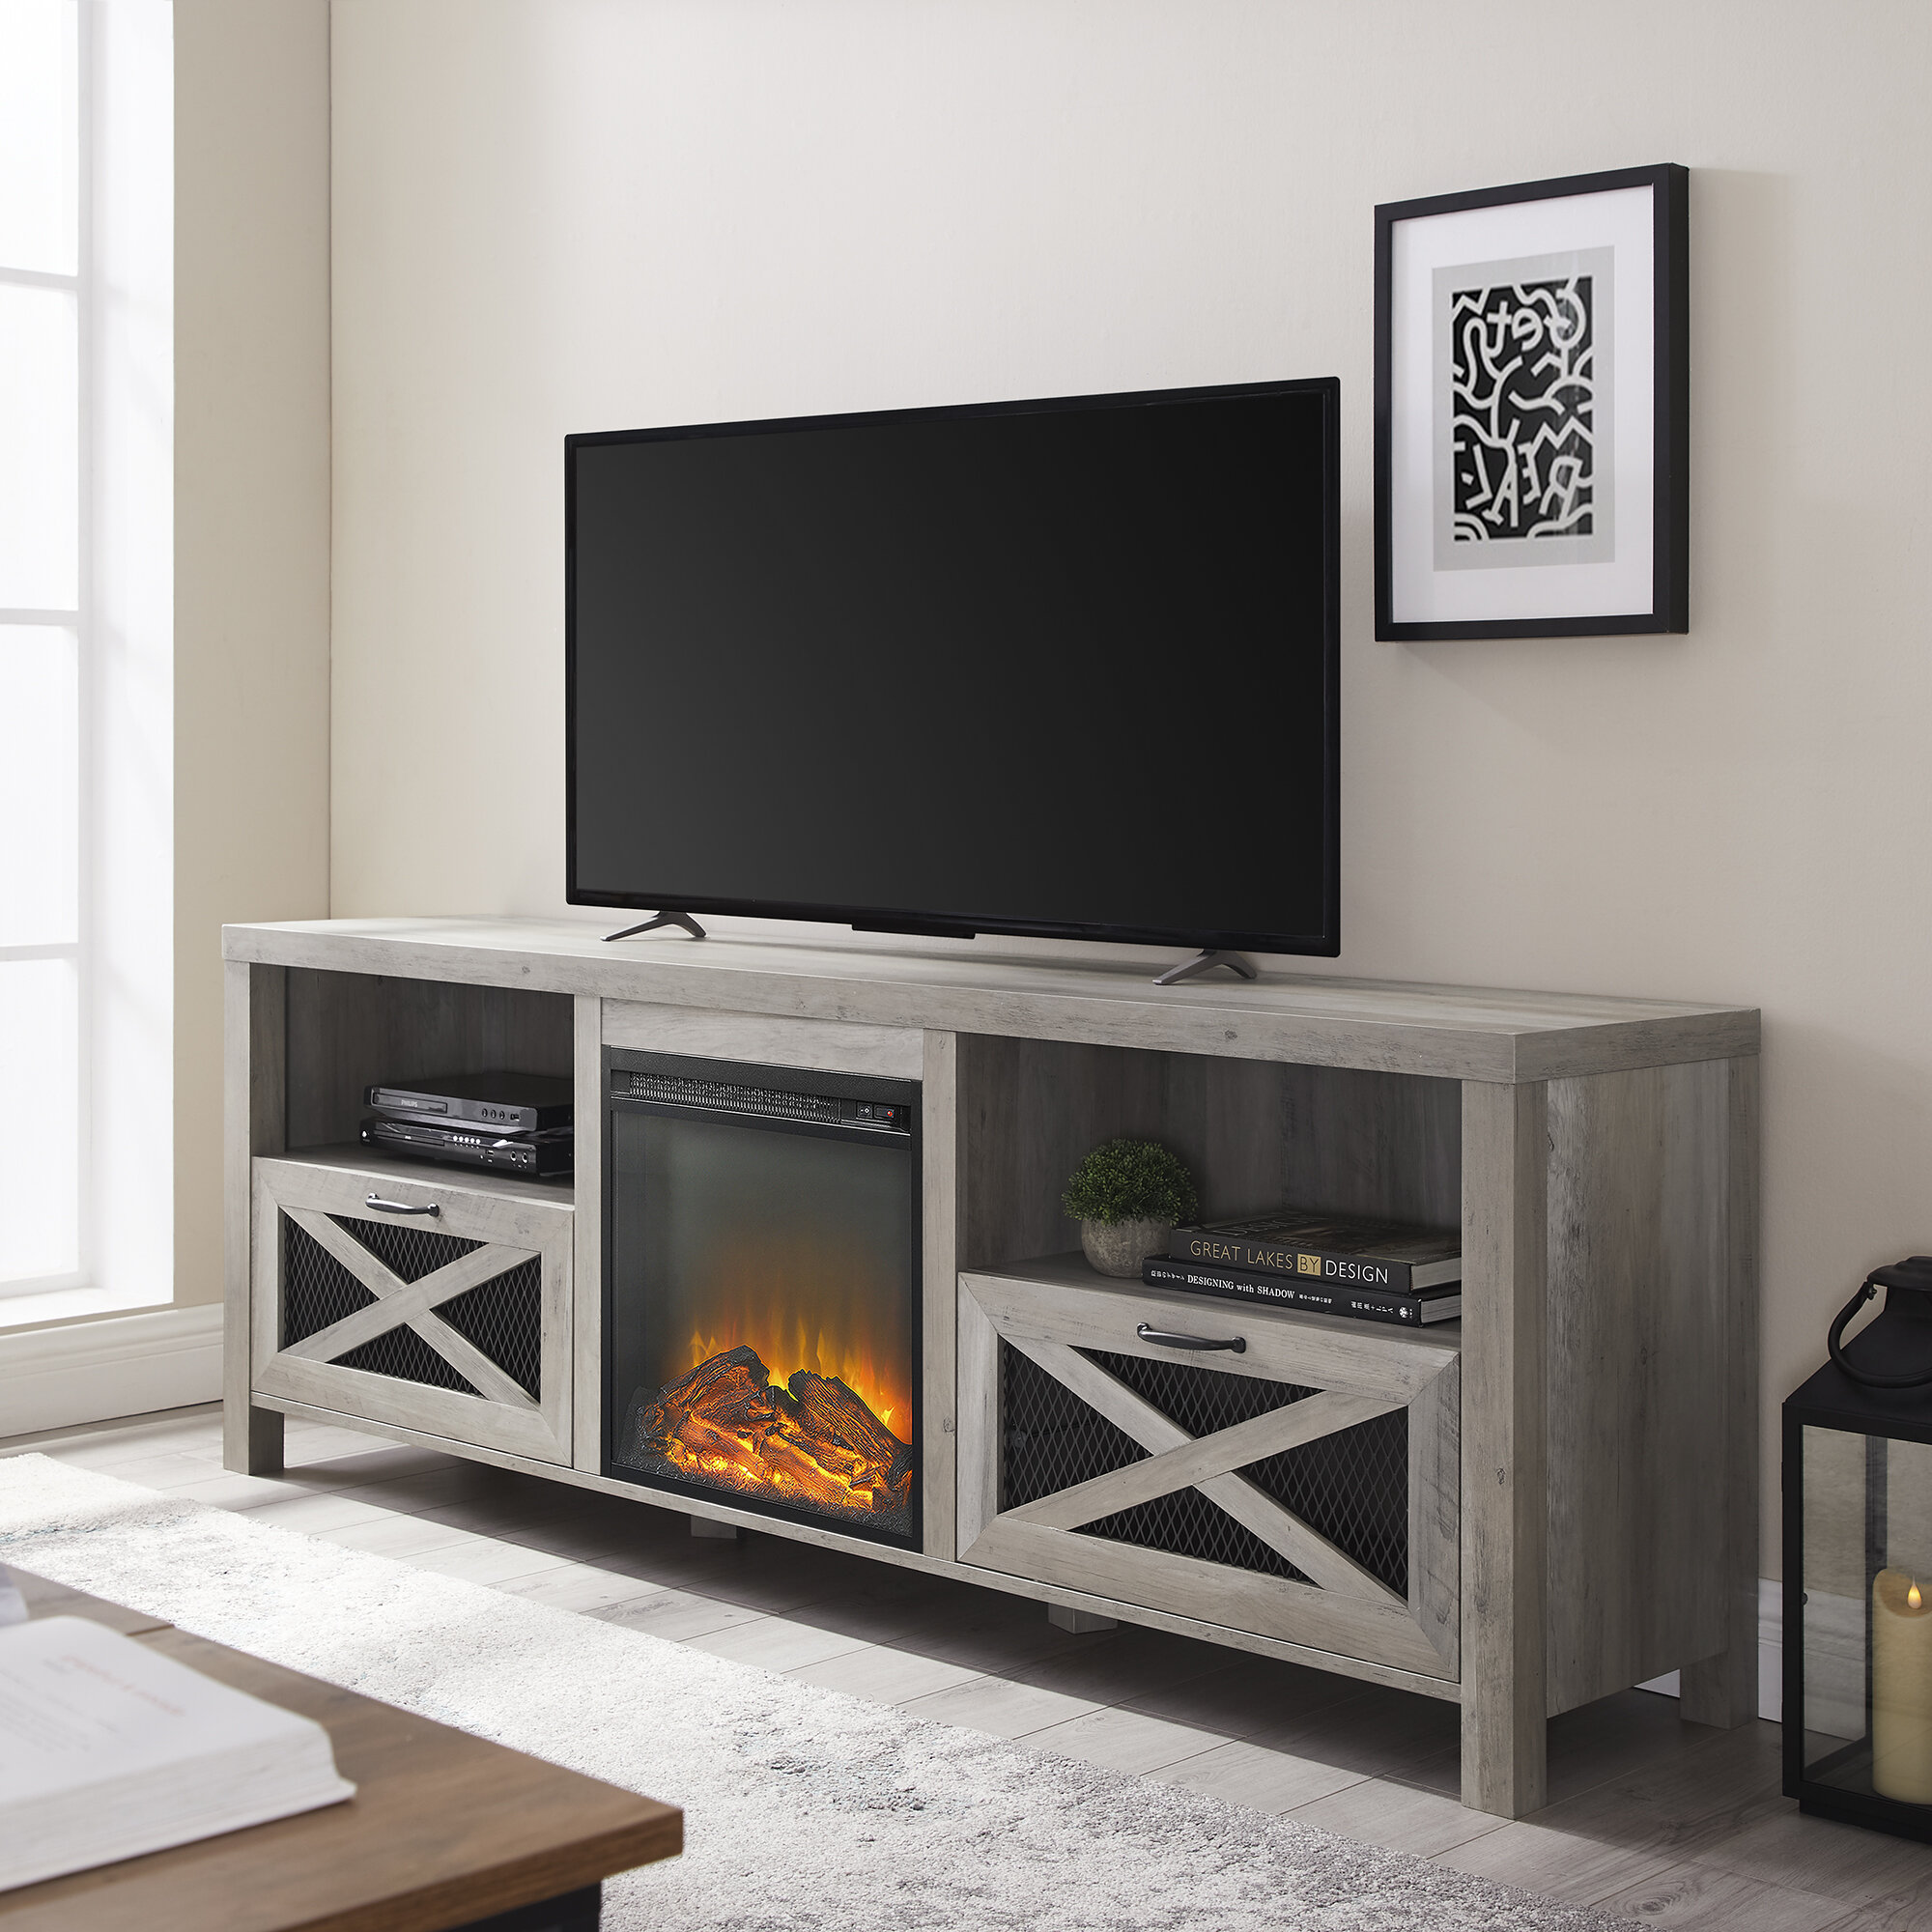 Grey Entertainment Center with Fireplace Best Of Tansey Tv Stand for Tvs Up to 70" with Electric Fireplace